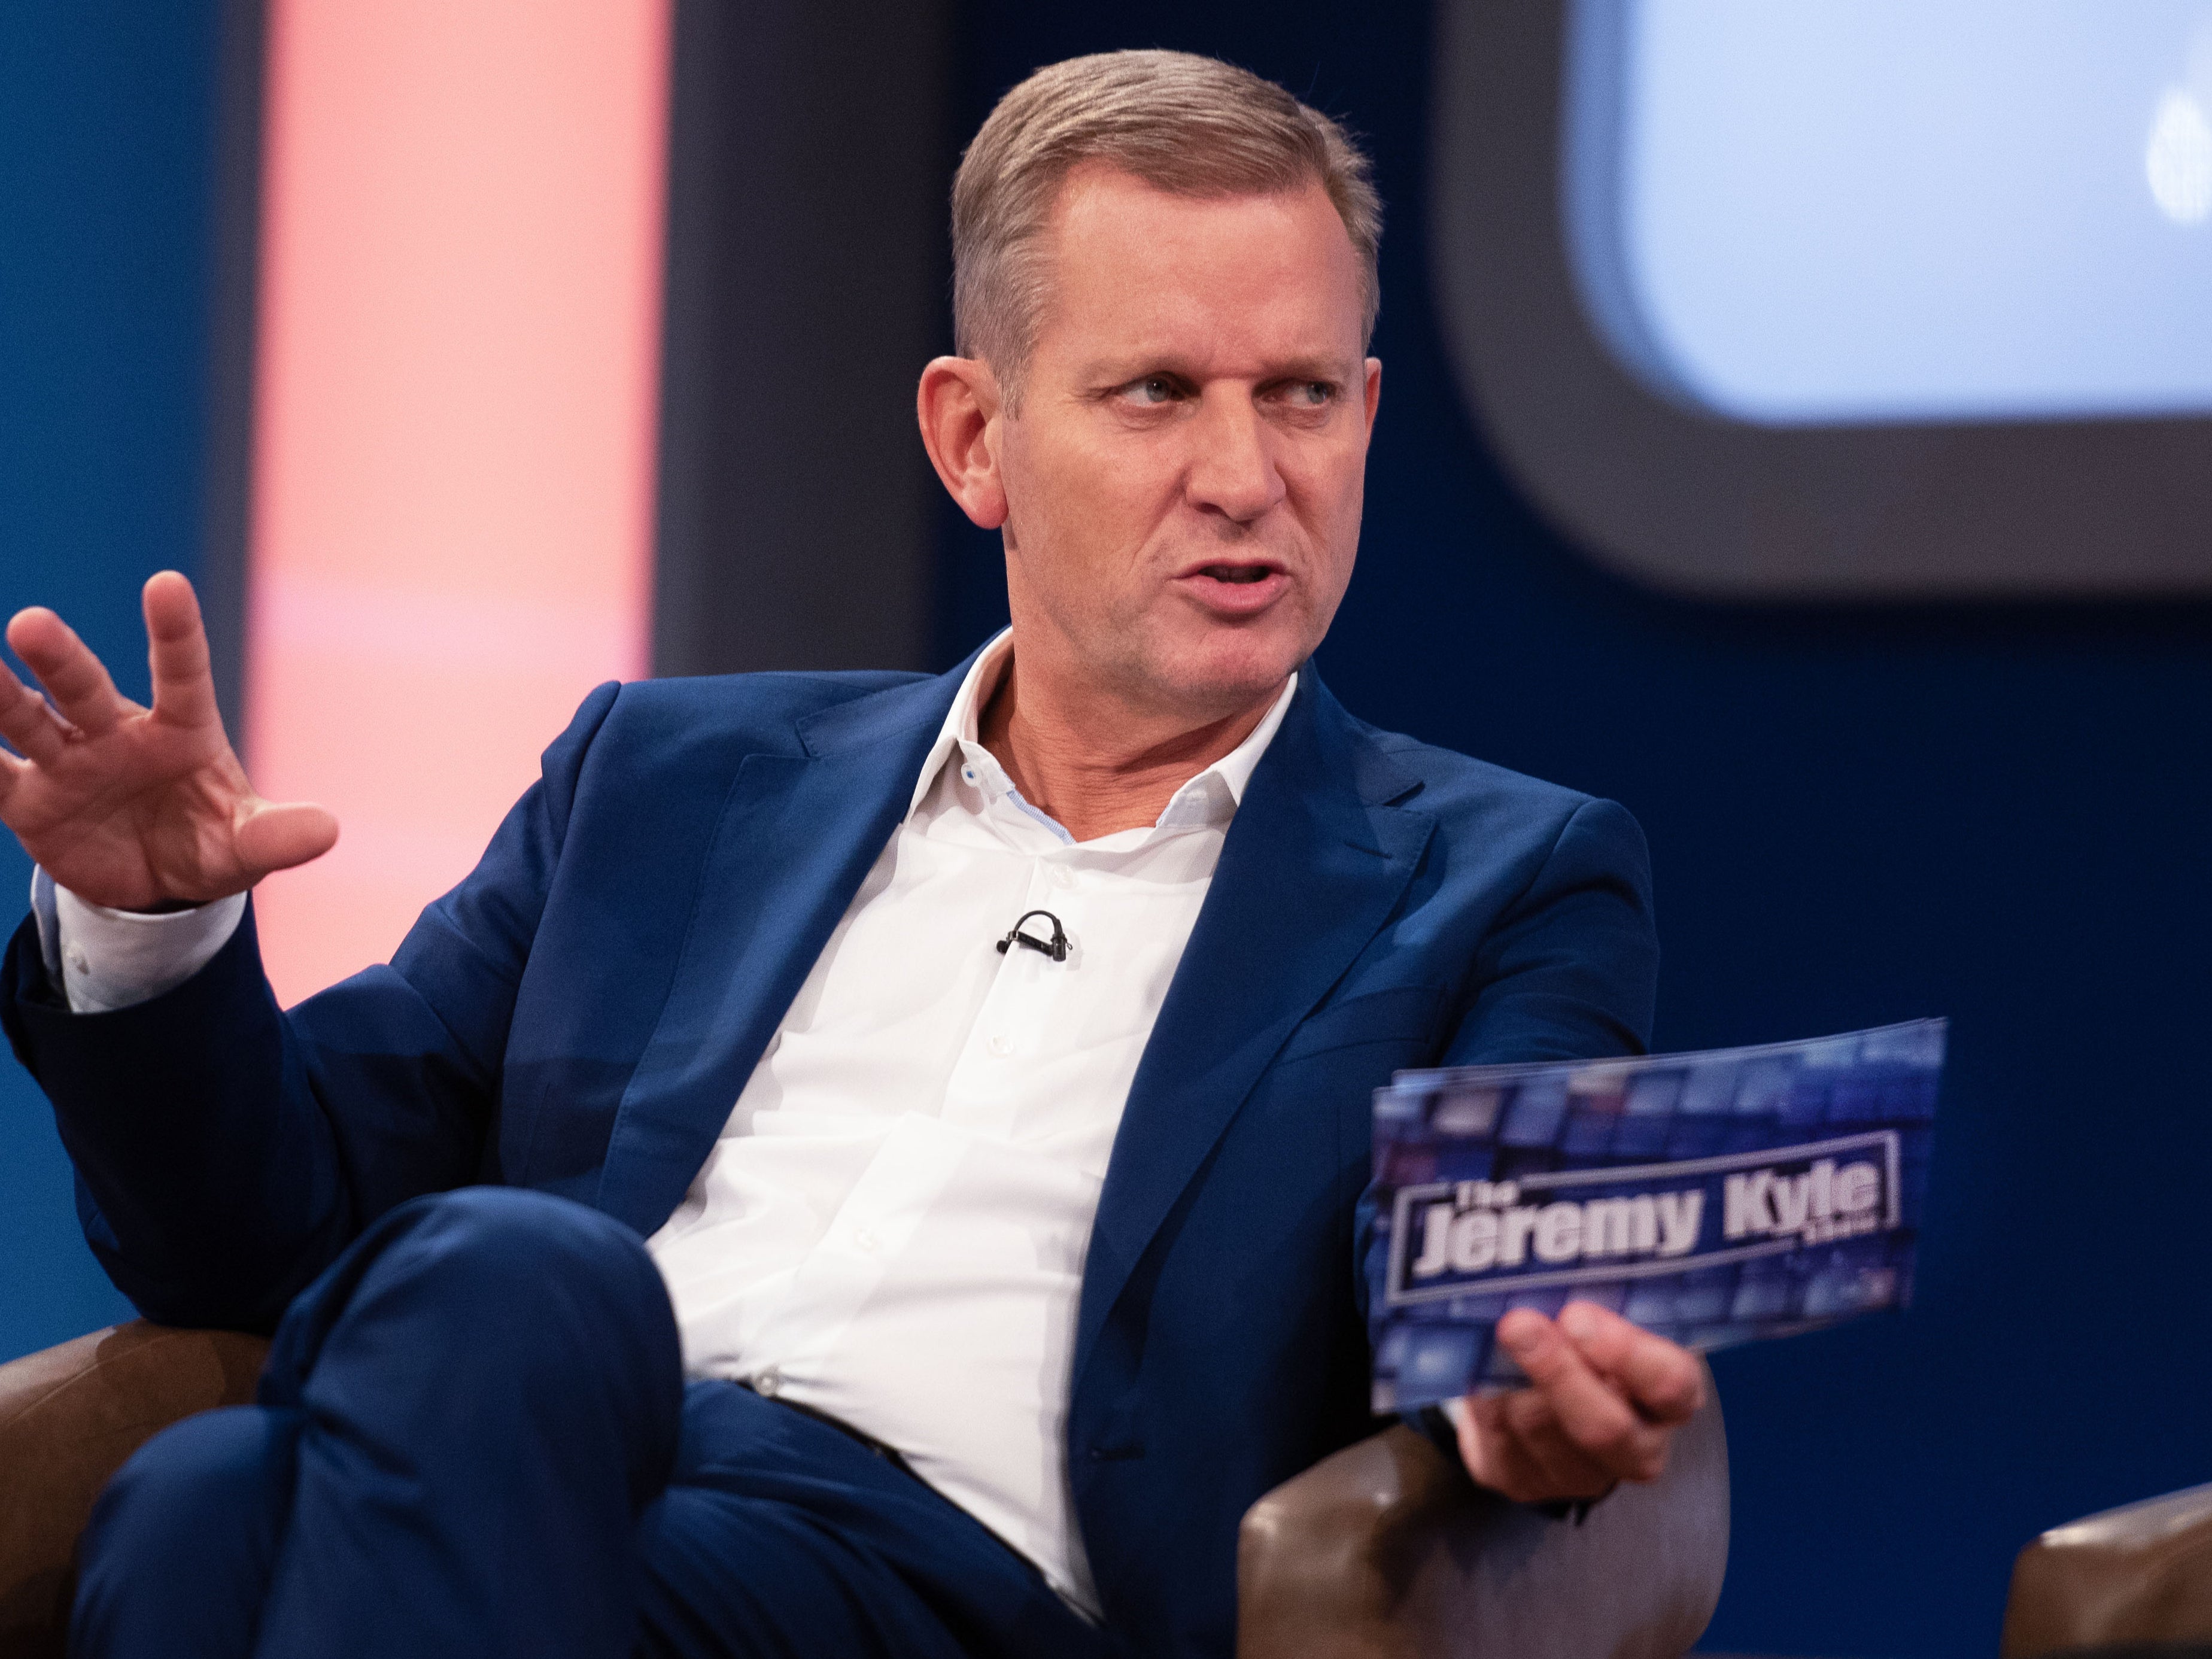 Jeremy Kyle on his controversial show in 2019